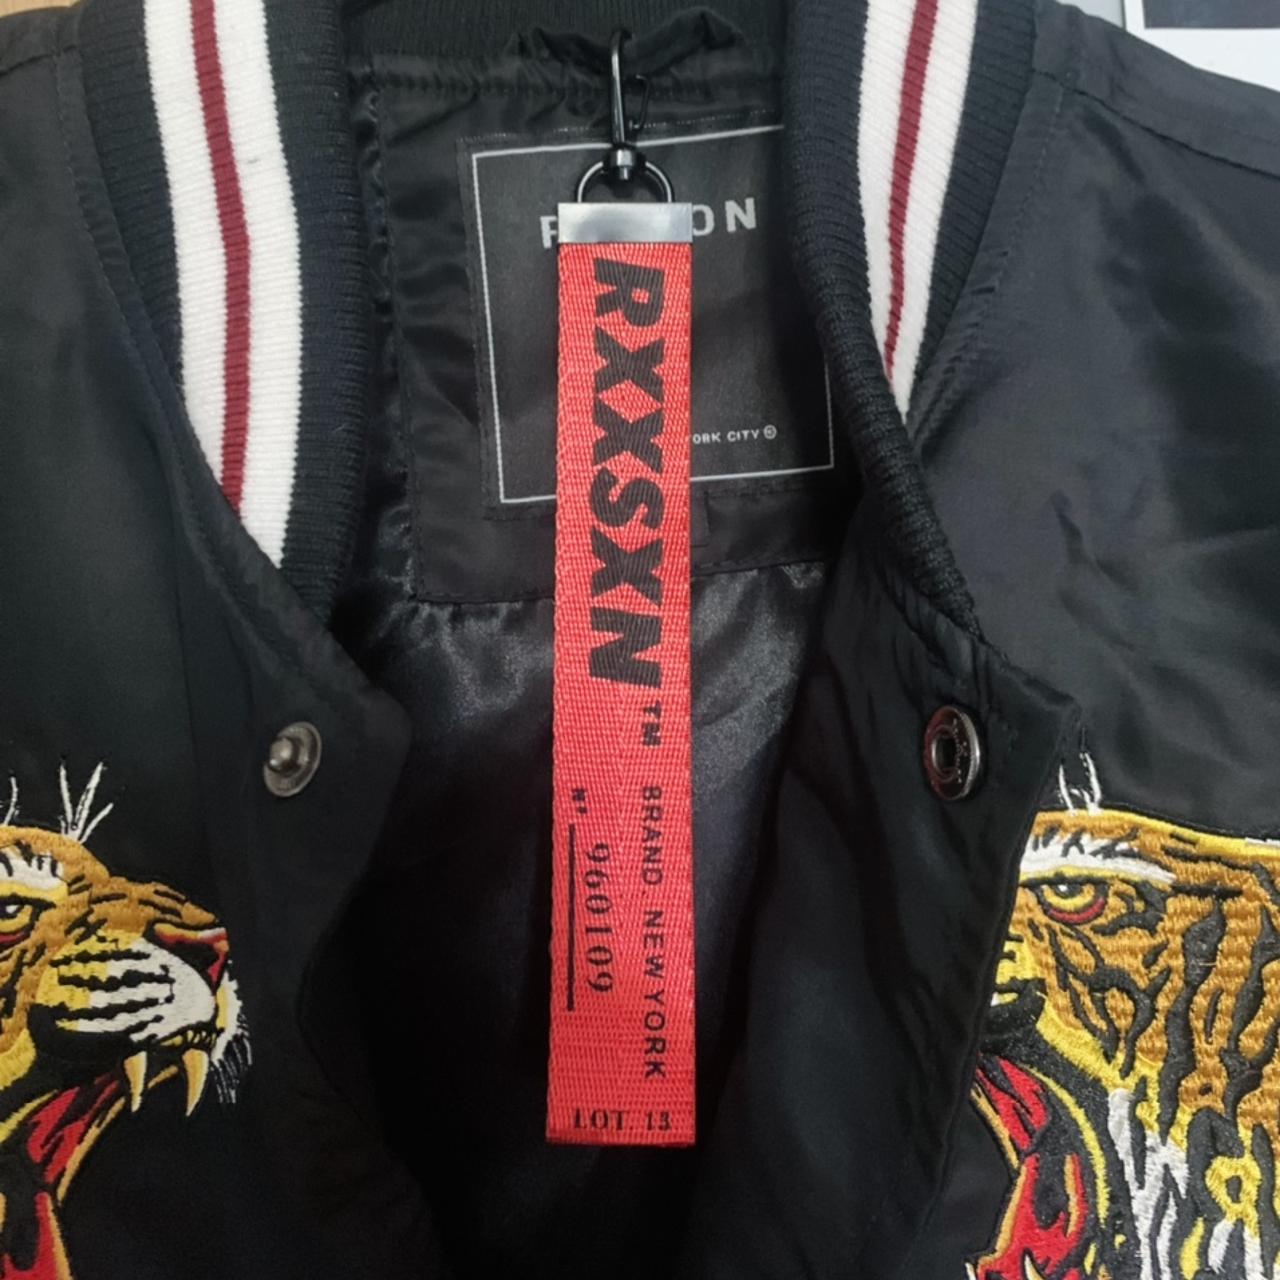 Urban outfitter Bomber jacket with the tiger on the - Depop